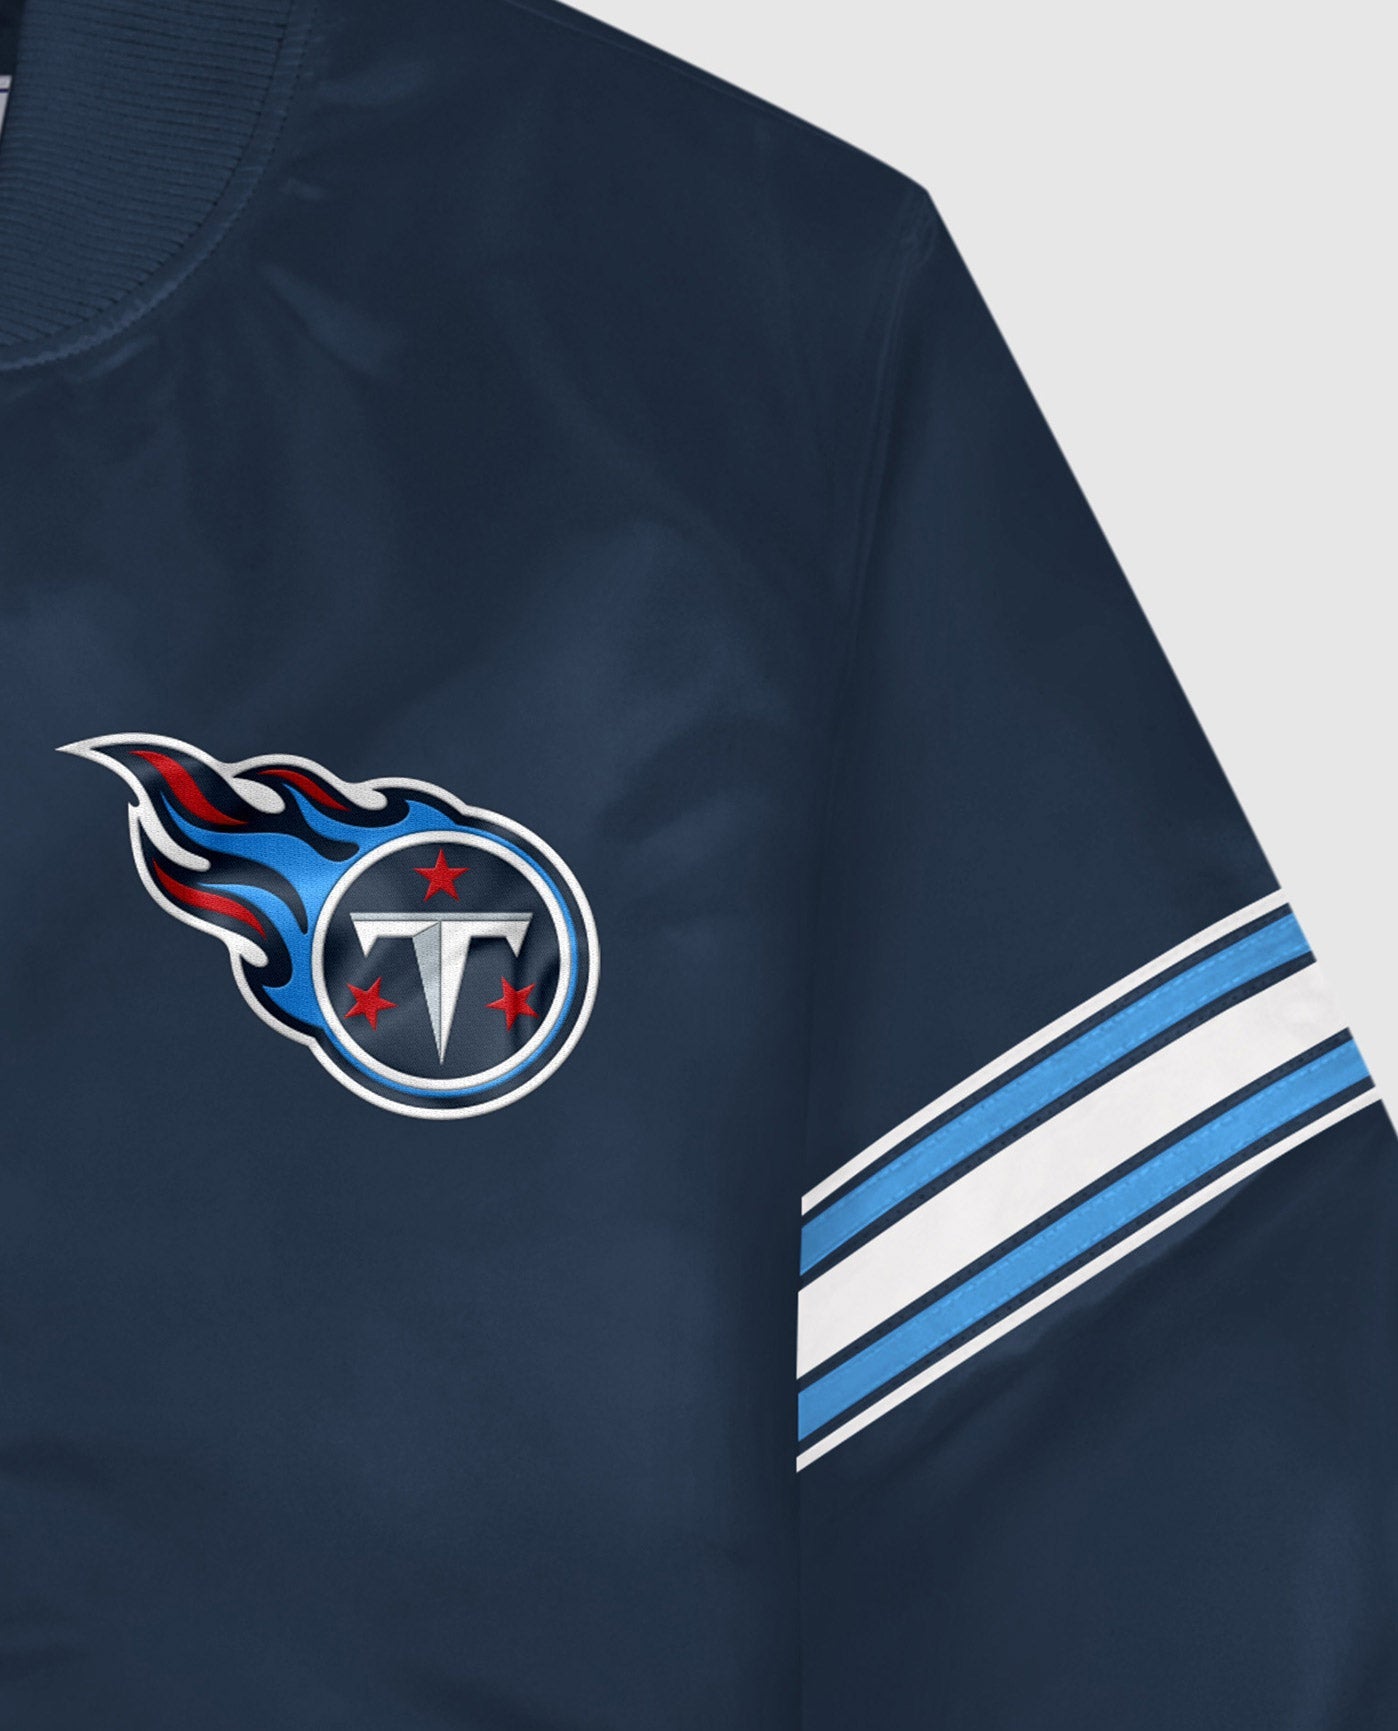 Tennessee Titans Twill Applique Logo And Color Stripe Sleeve | Titans Navy